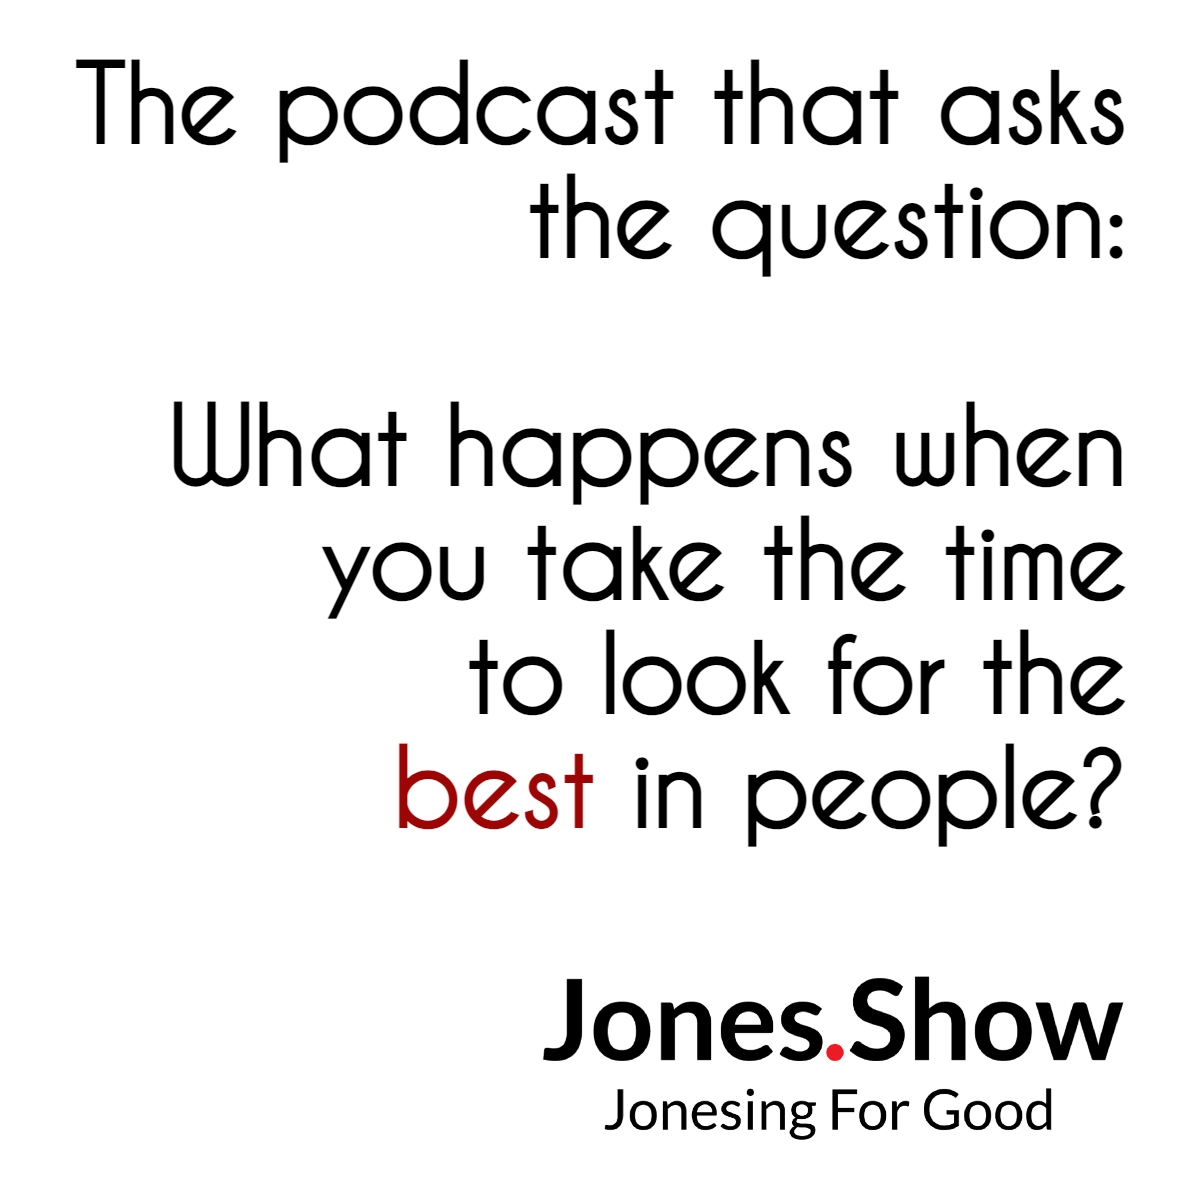 This can be tough to do, but I'm pleased that my #podcast has continued #jonesingforgood in pursuit of the #positive. Please join us. #OnTheKnows
Web: Jones.Show
Apple: apple.co/2xGm4Yl
Google: bit.ly/2OQg59D
Spotify: spoti.fi/2IlVwzs